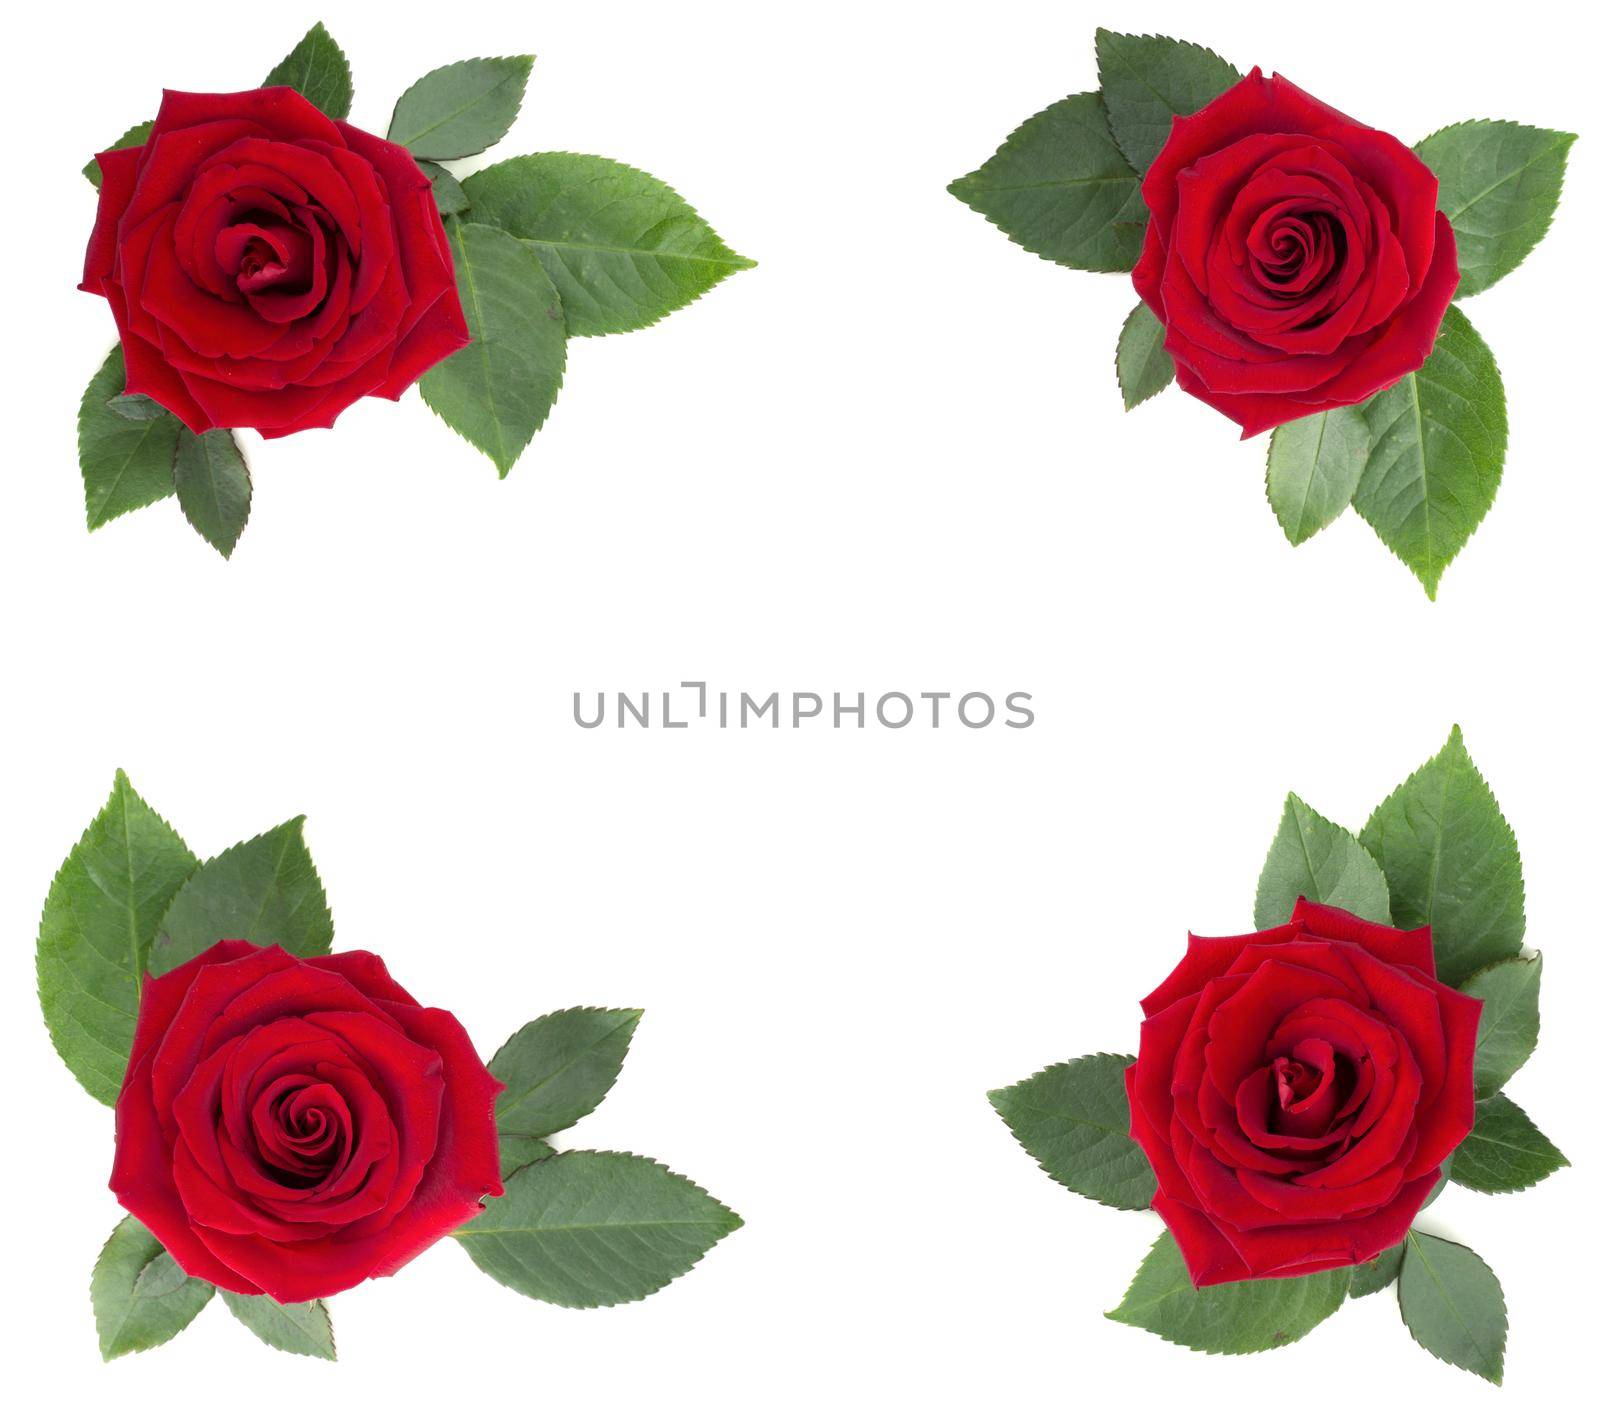 Red rose flowers and leaves arrangement corner border frame design element isolated on white background, top view, Valentines day